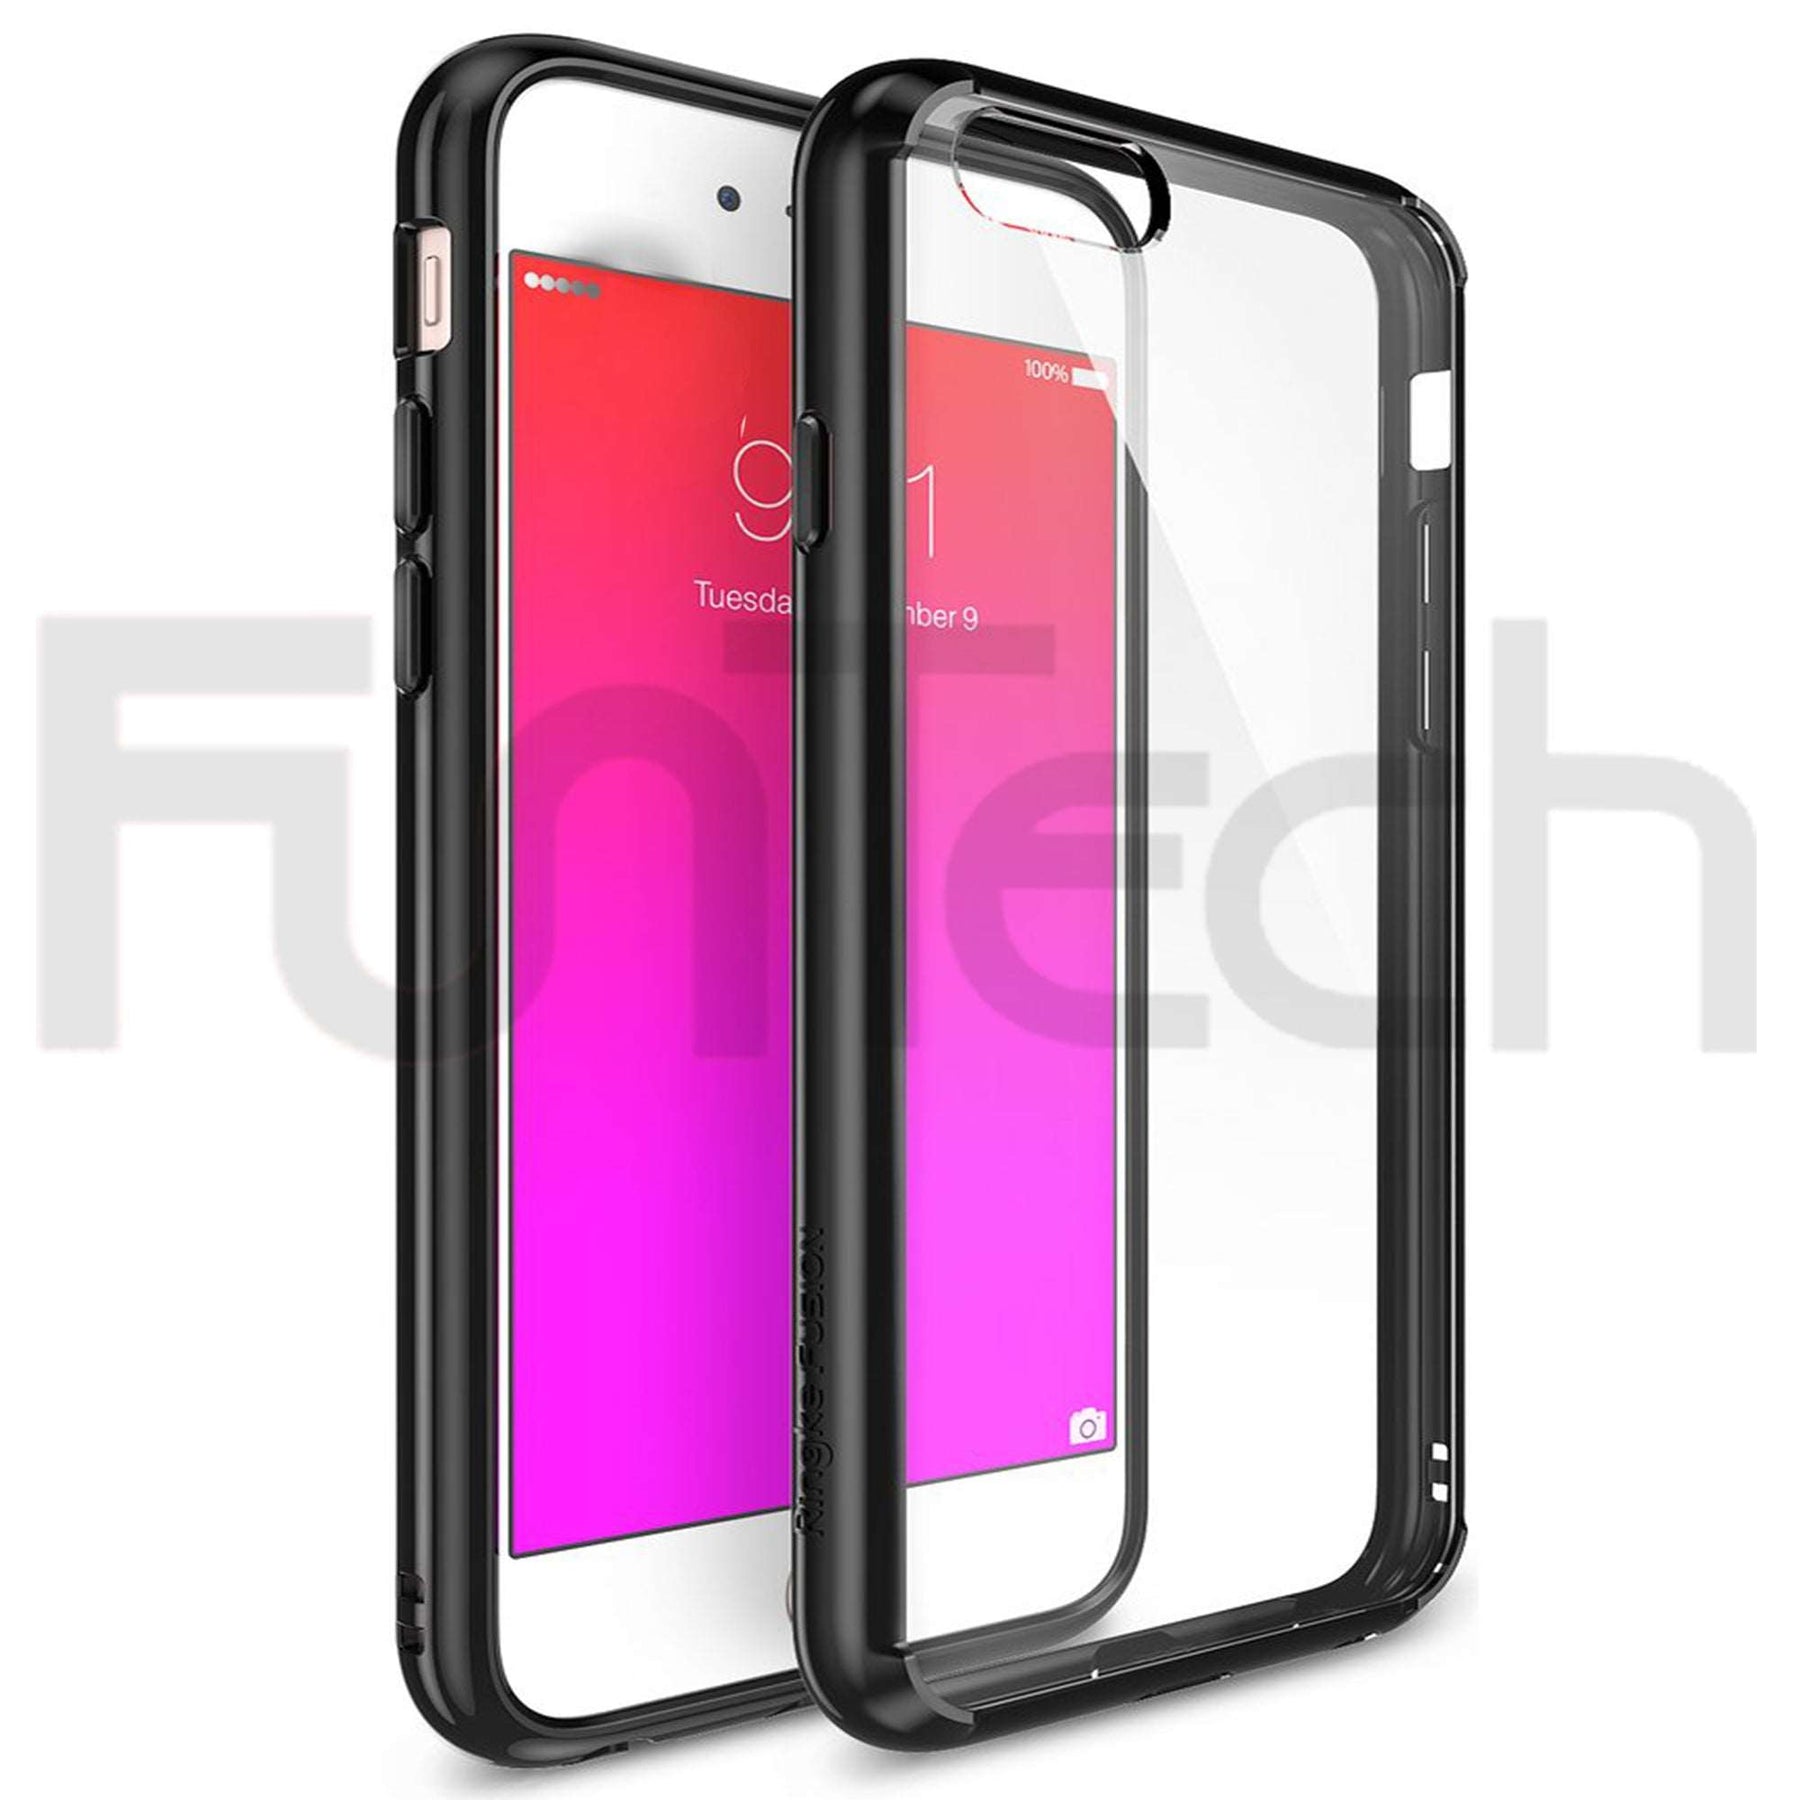 Apple iPhone 6 Plus / 6s Plus, Clear Soft TPU Back Cover Case With Rubber Black Frame.